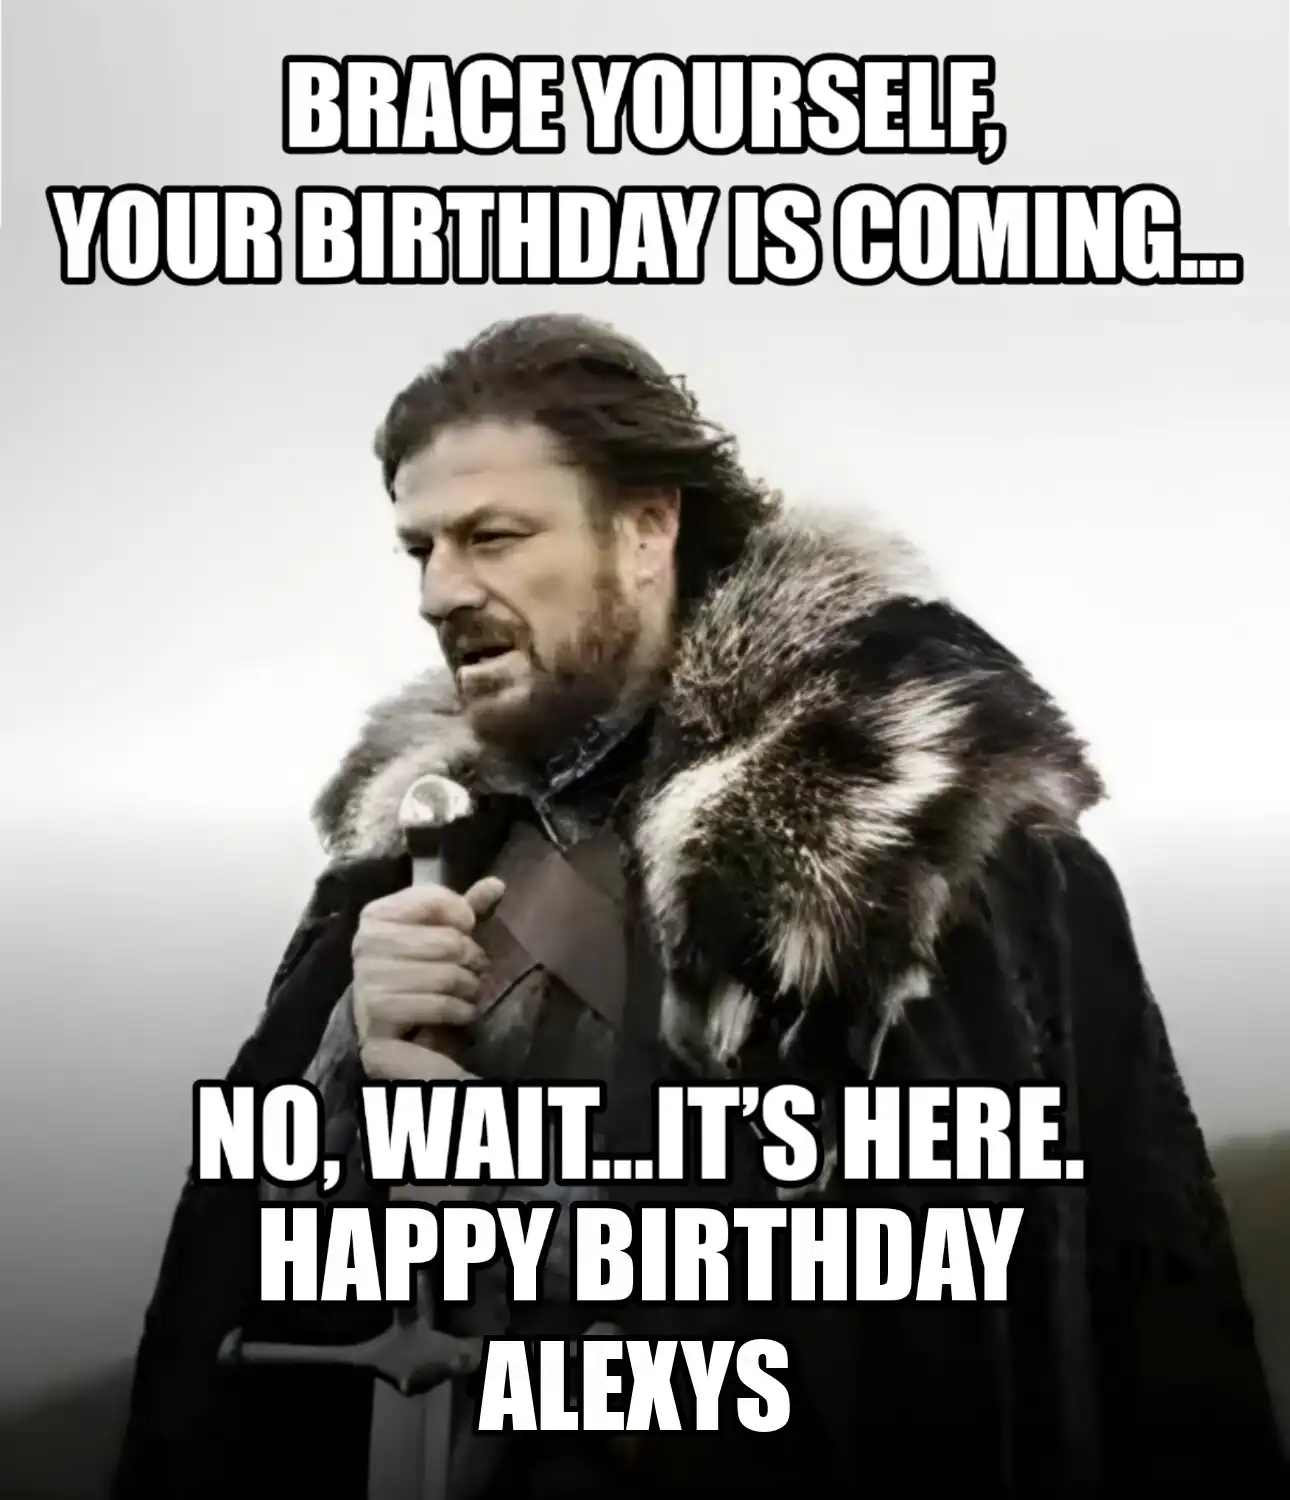 Happy Birthday Alexys Brace Yourself Your Birthday Is Coming Meme